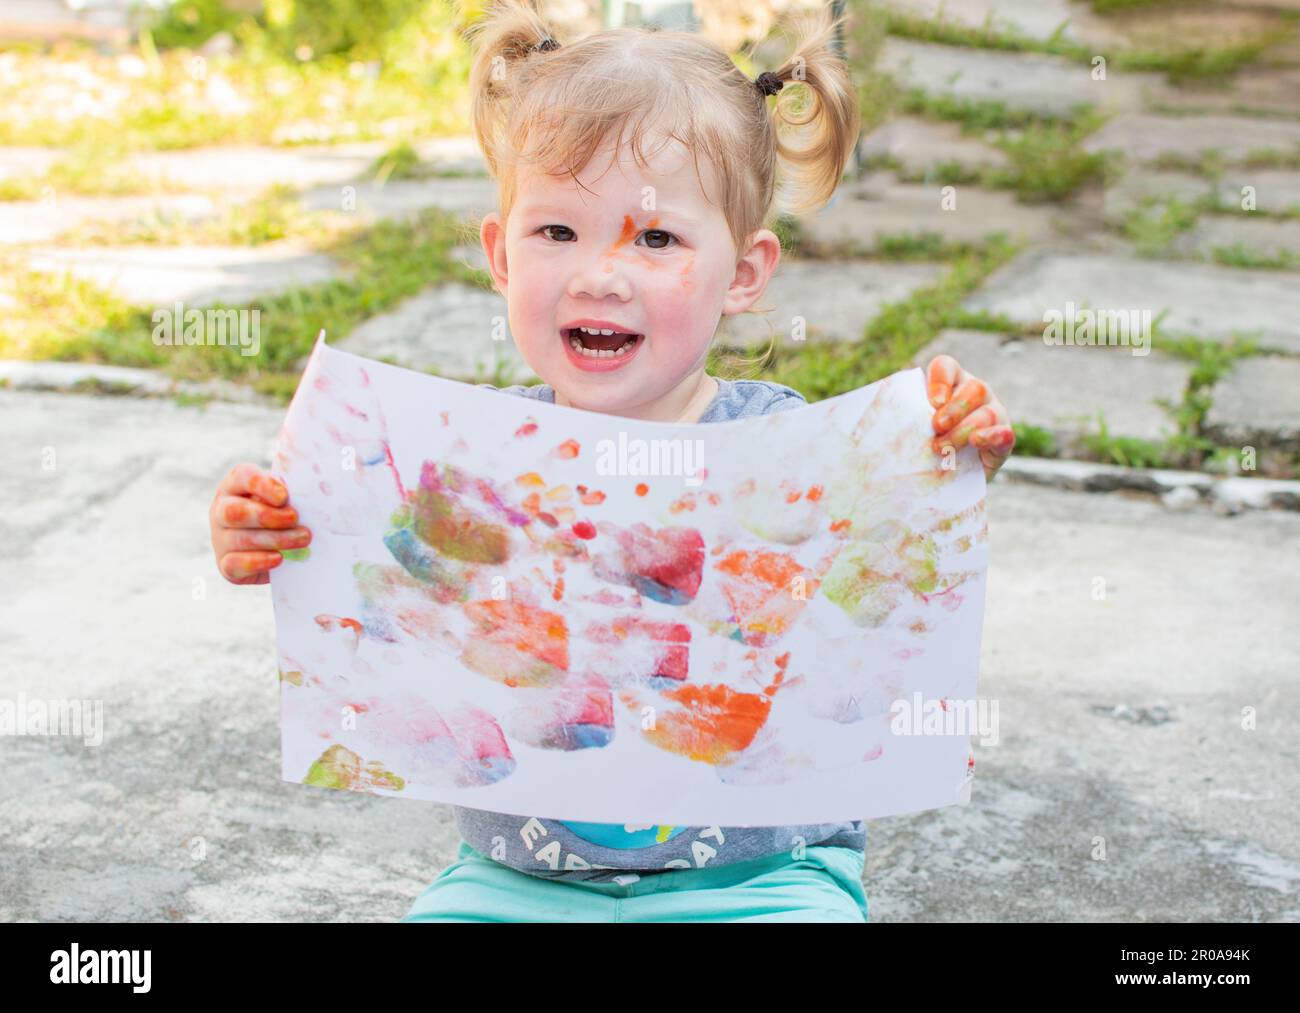 Happy Caucasian toddler girl with 2 pigtails showing off her artwork made with finger paints. Sensory art activities for kids. Stock Photo